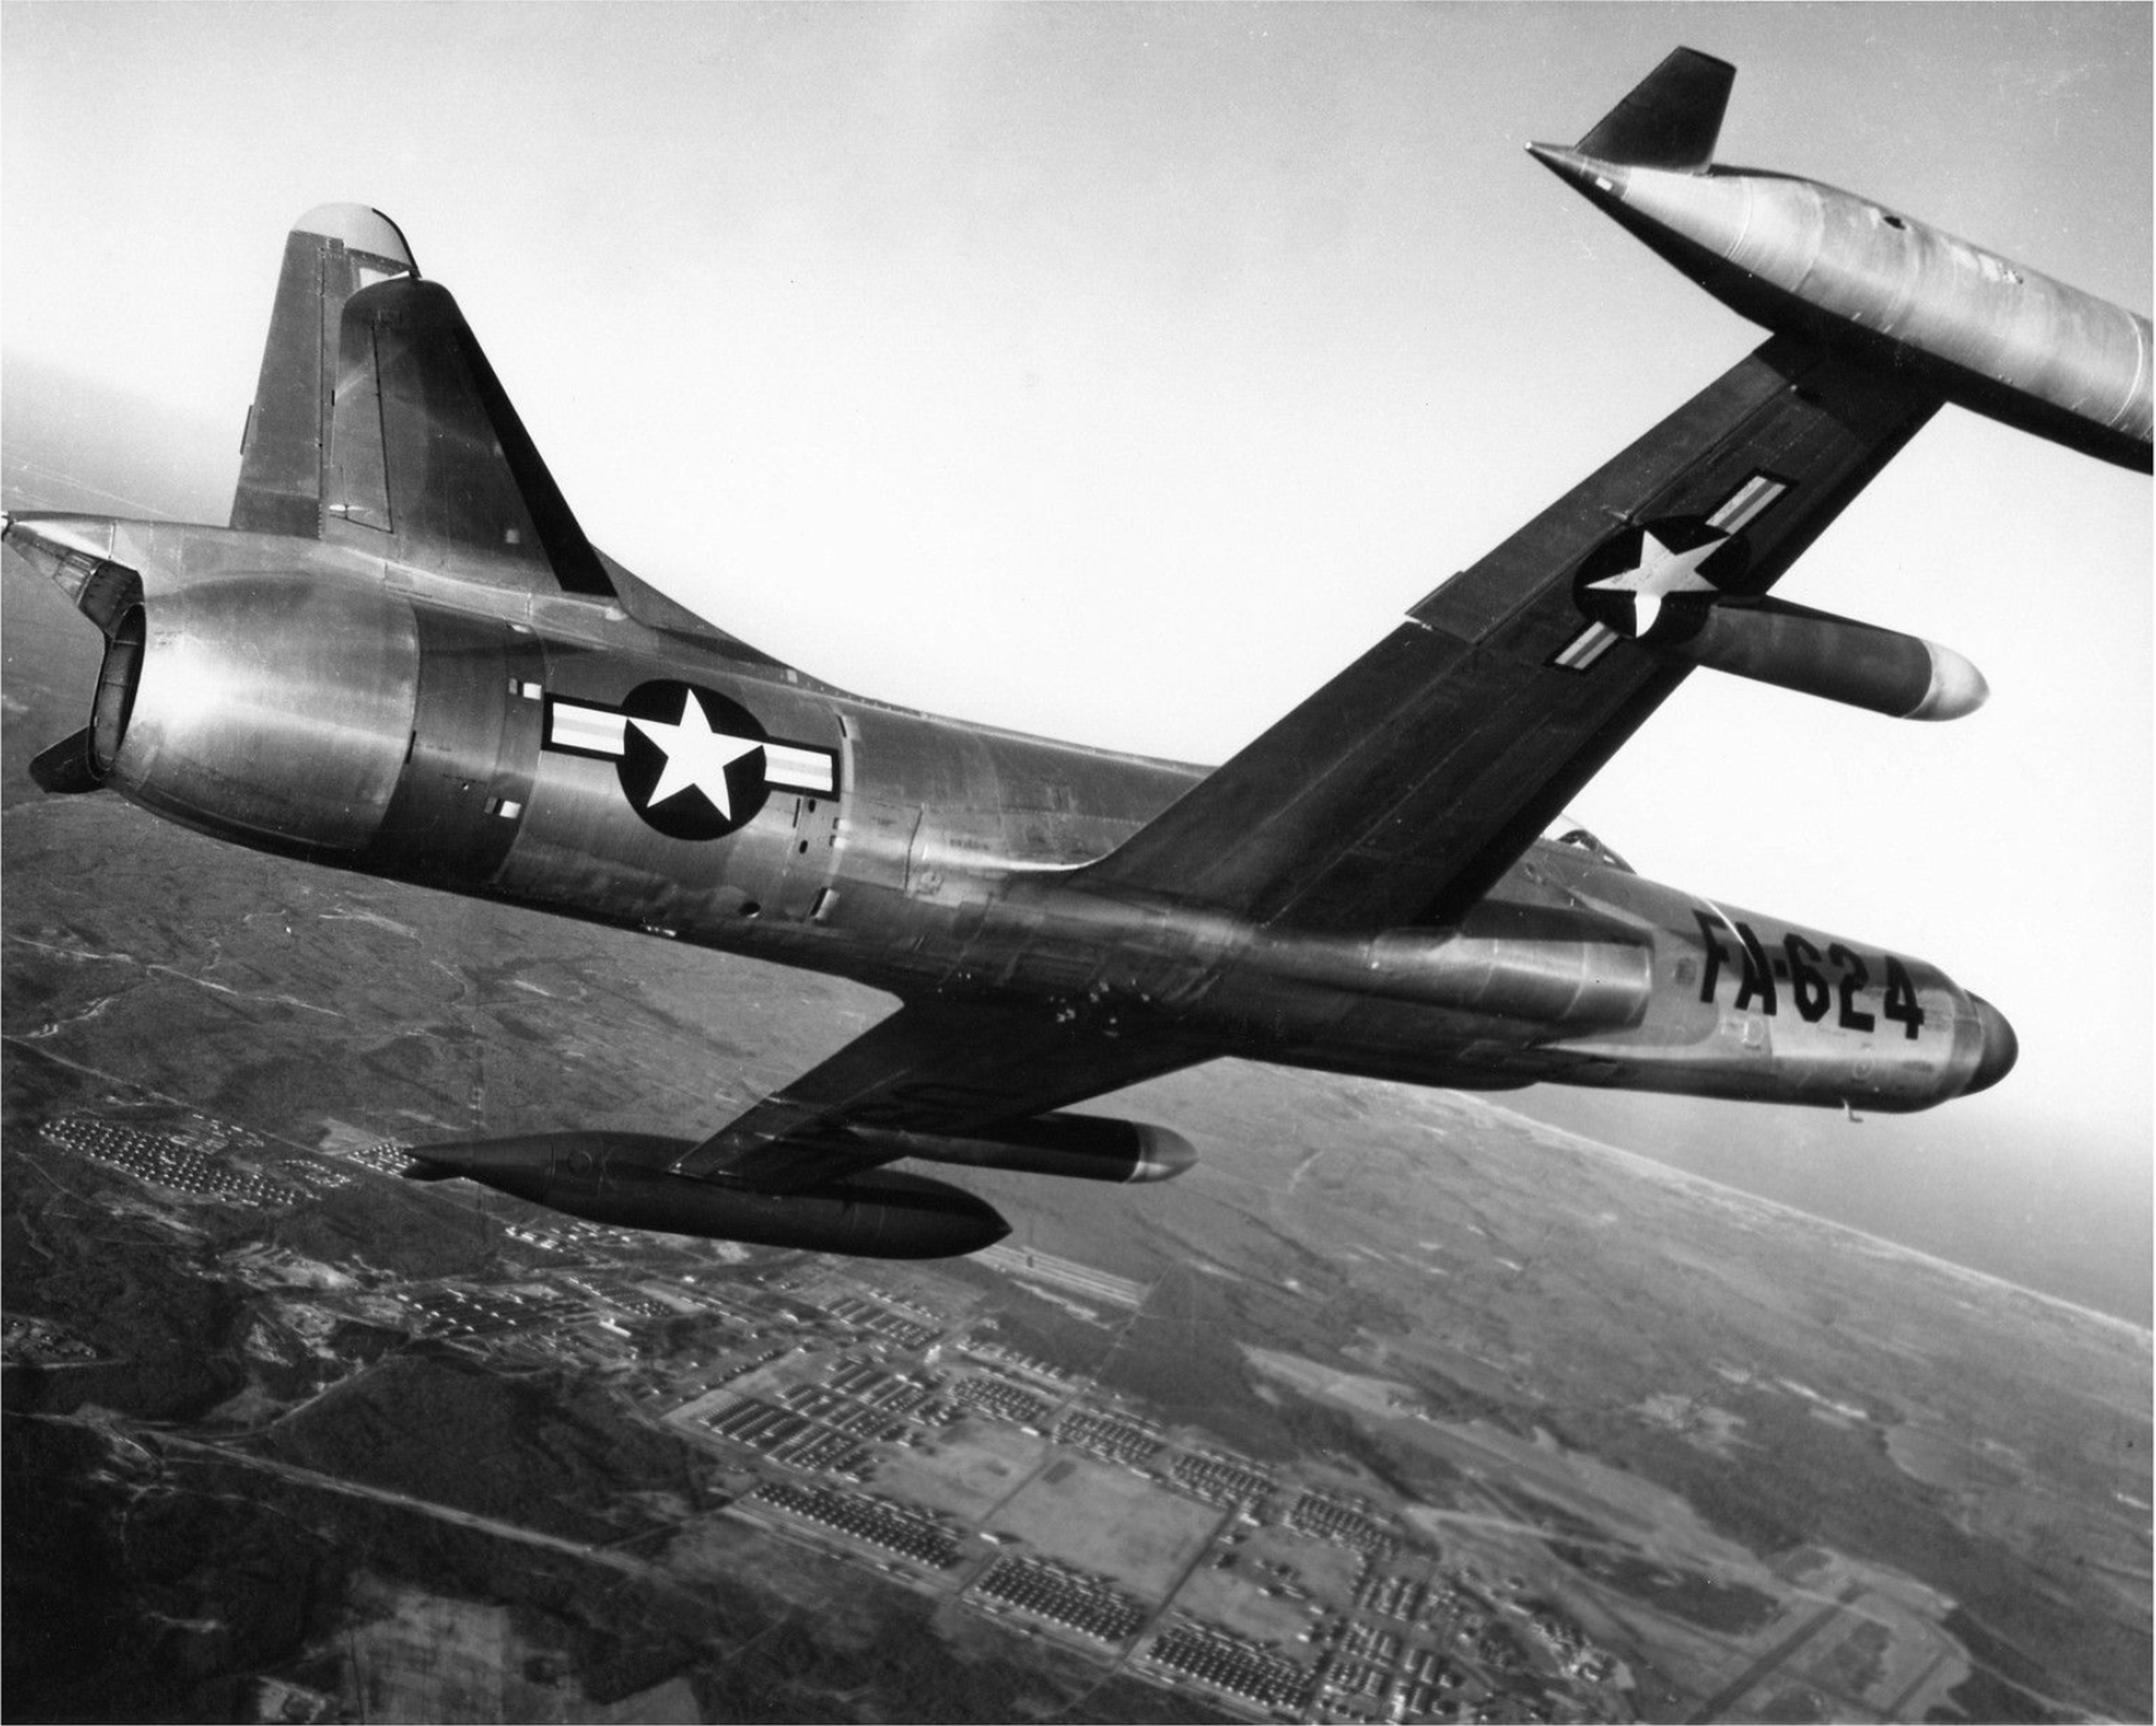 July 23, 1952 – Three F-94 Starfire fighter jets flying above Pottstown, Pa. reported seeing a “large pear-shaped” and silver object with no visible means of propulsion. Two smaller, darker objects also appeared to run circles around the larger craft for a period of 30 minutes. The incident was investigated the U.S. military's Project Blue Book and remains unsolved.